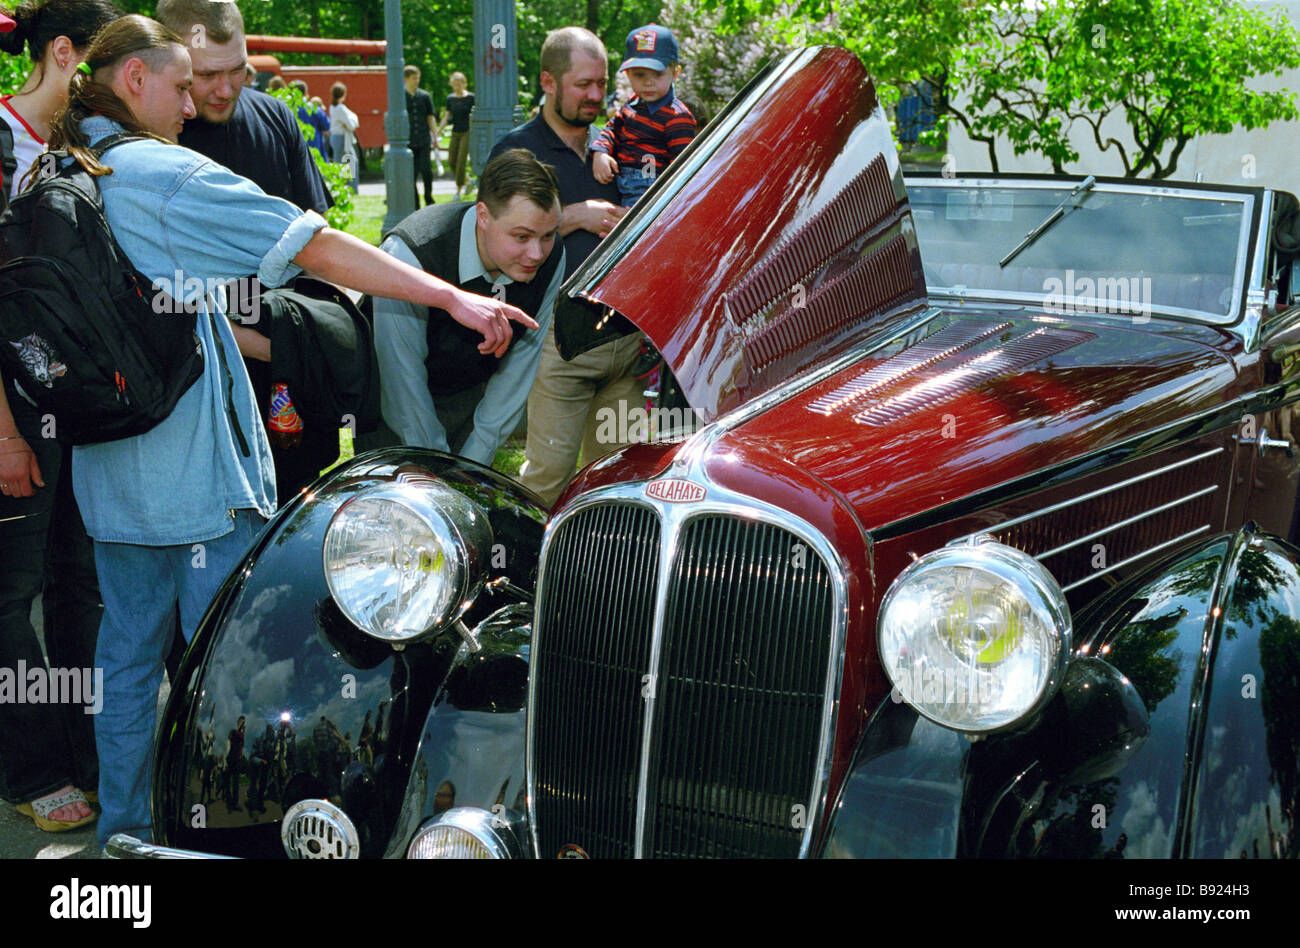 Opening ceremony of the 3rd Retro style festival of vintage cars Delahay 135 1939 Germany Stock Photo